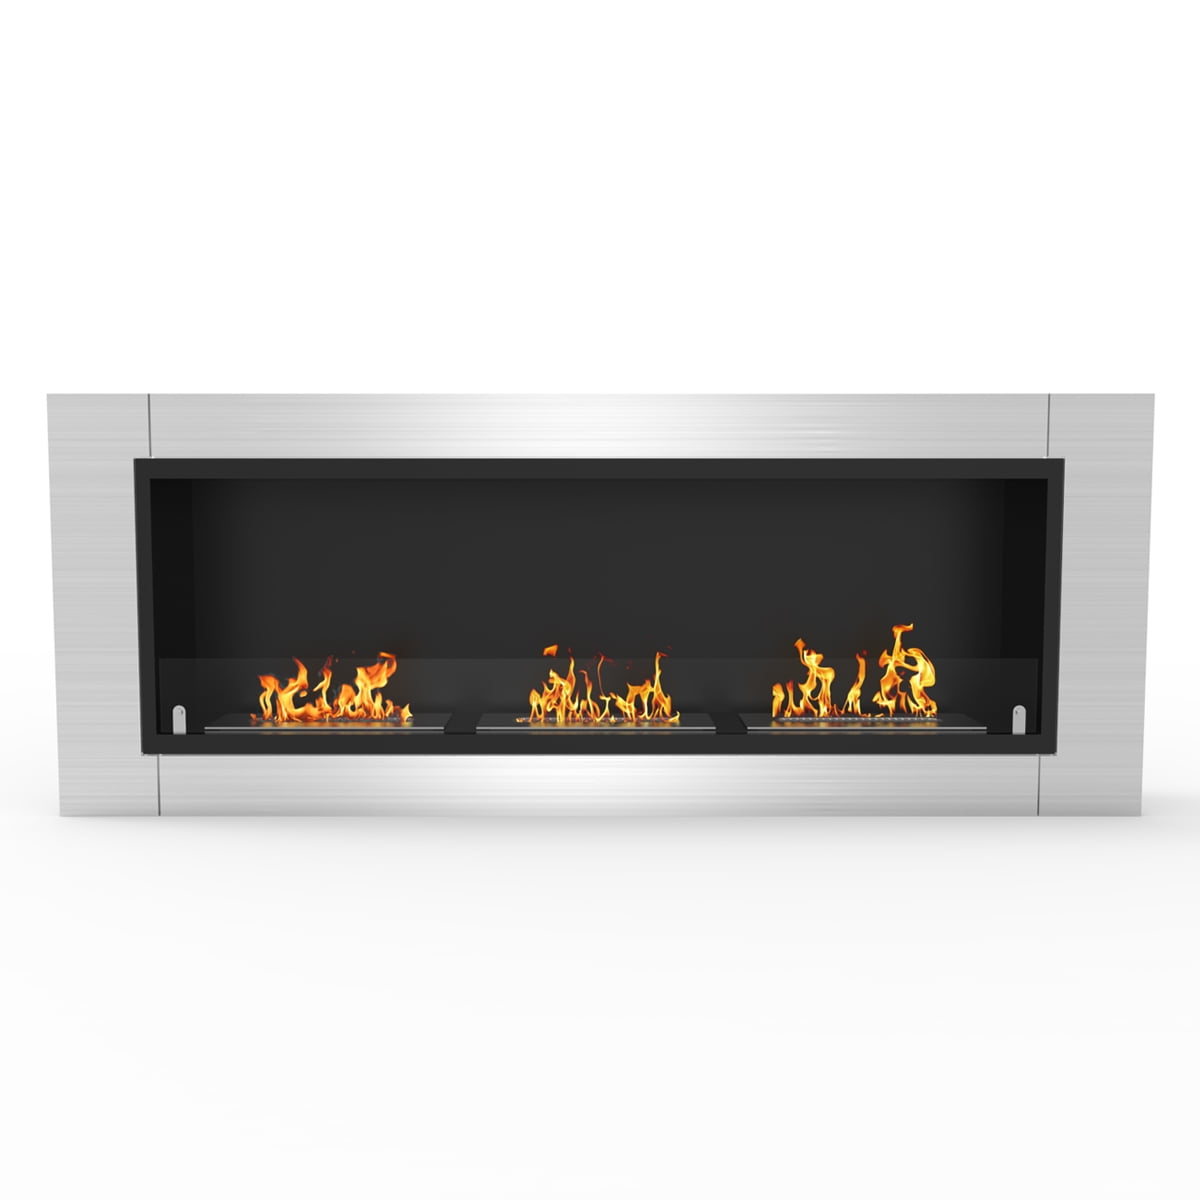 Regal Flame Elite Lenox 54 Inch Ventless Built In Recessed Bio Ethanol Wall Mounted Fireplace